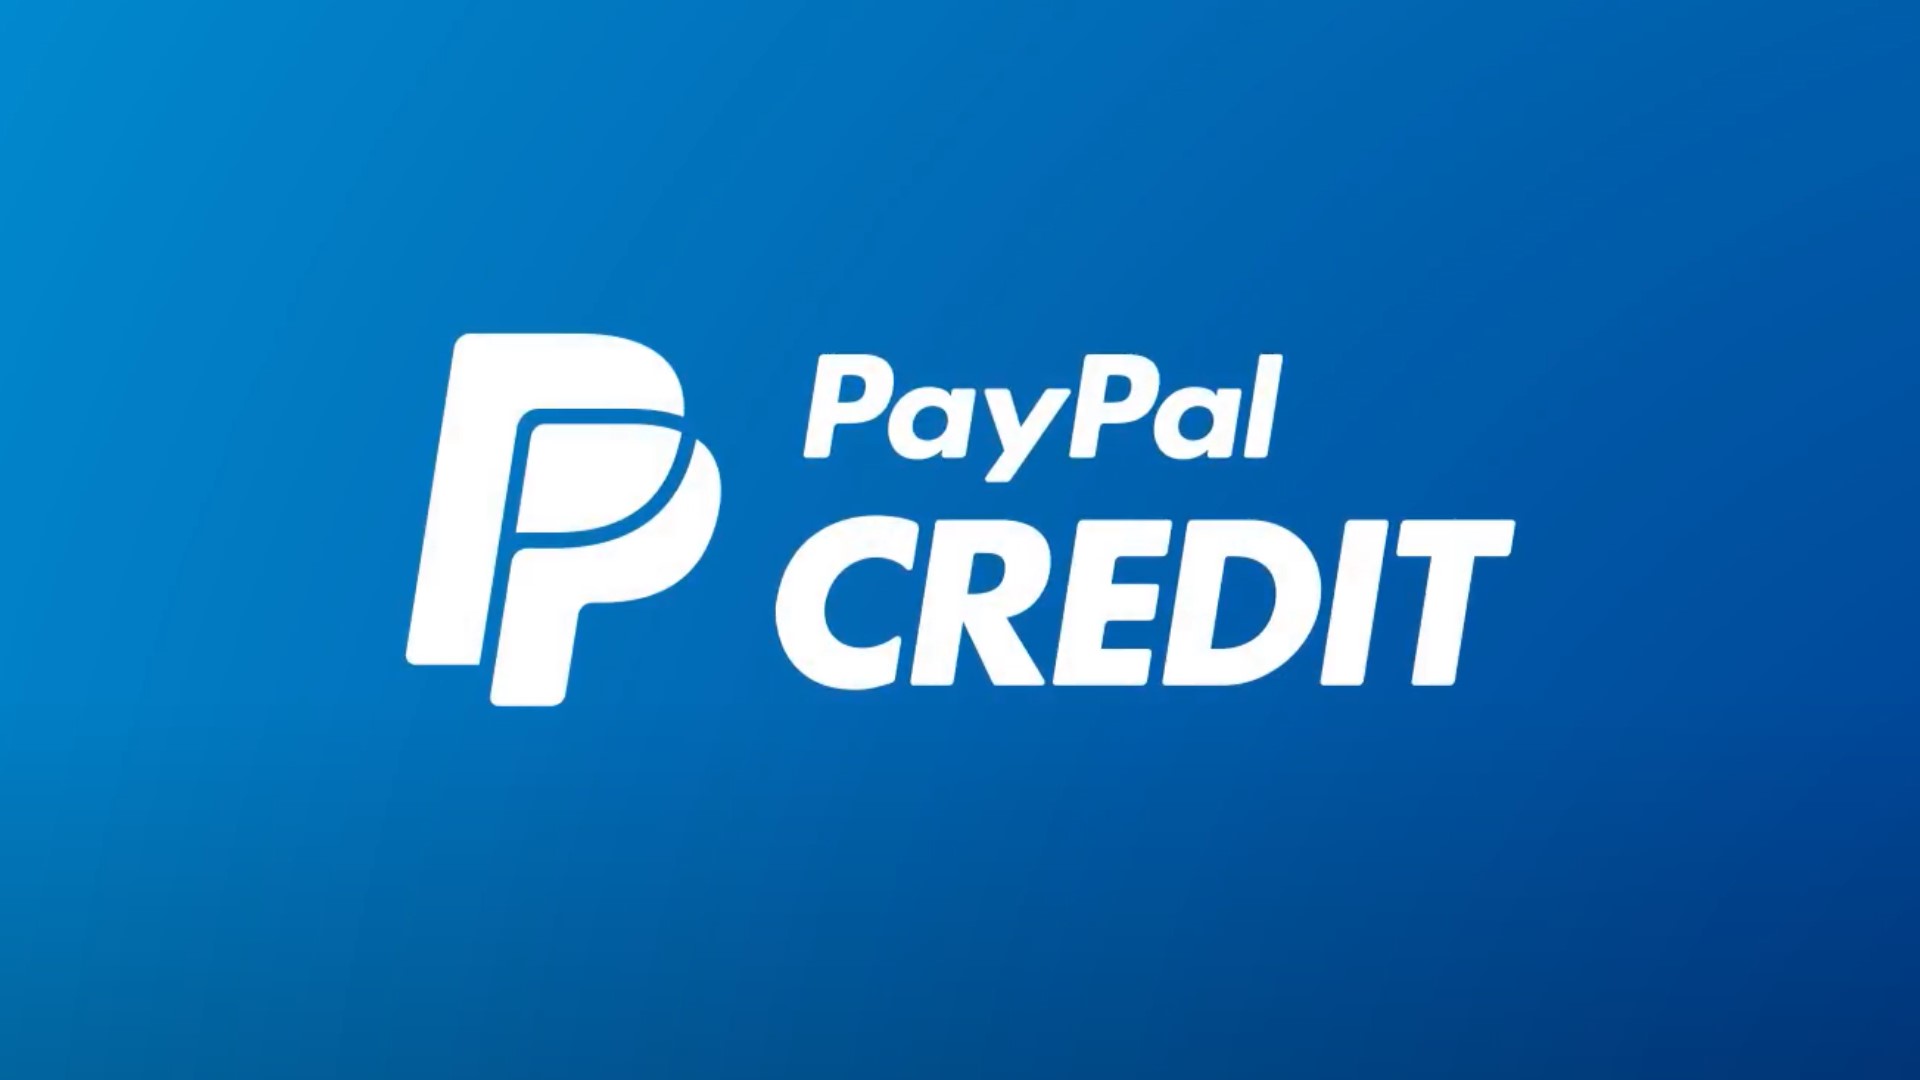 Does Home Depot Accept PayPal In 2022? (Your Full Guide)